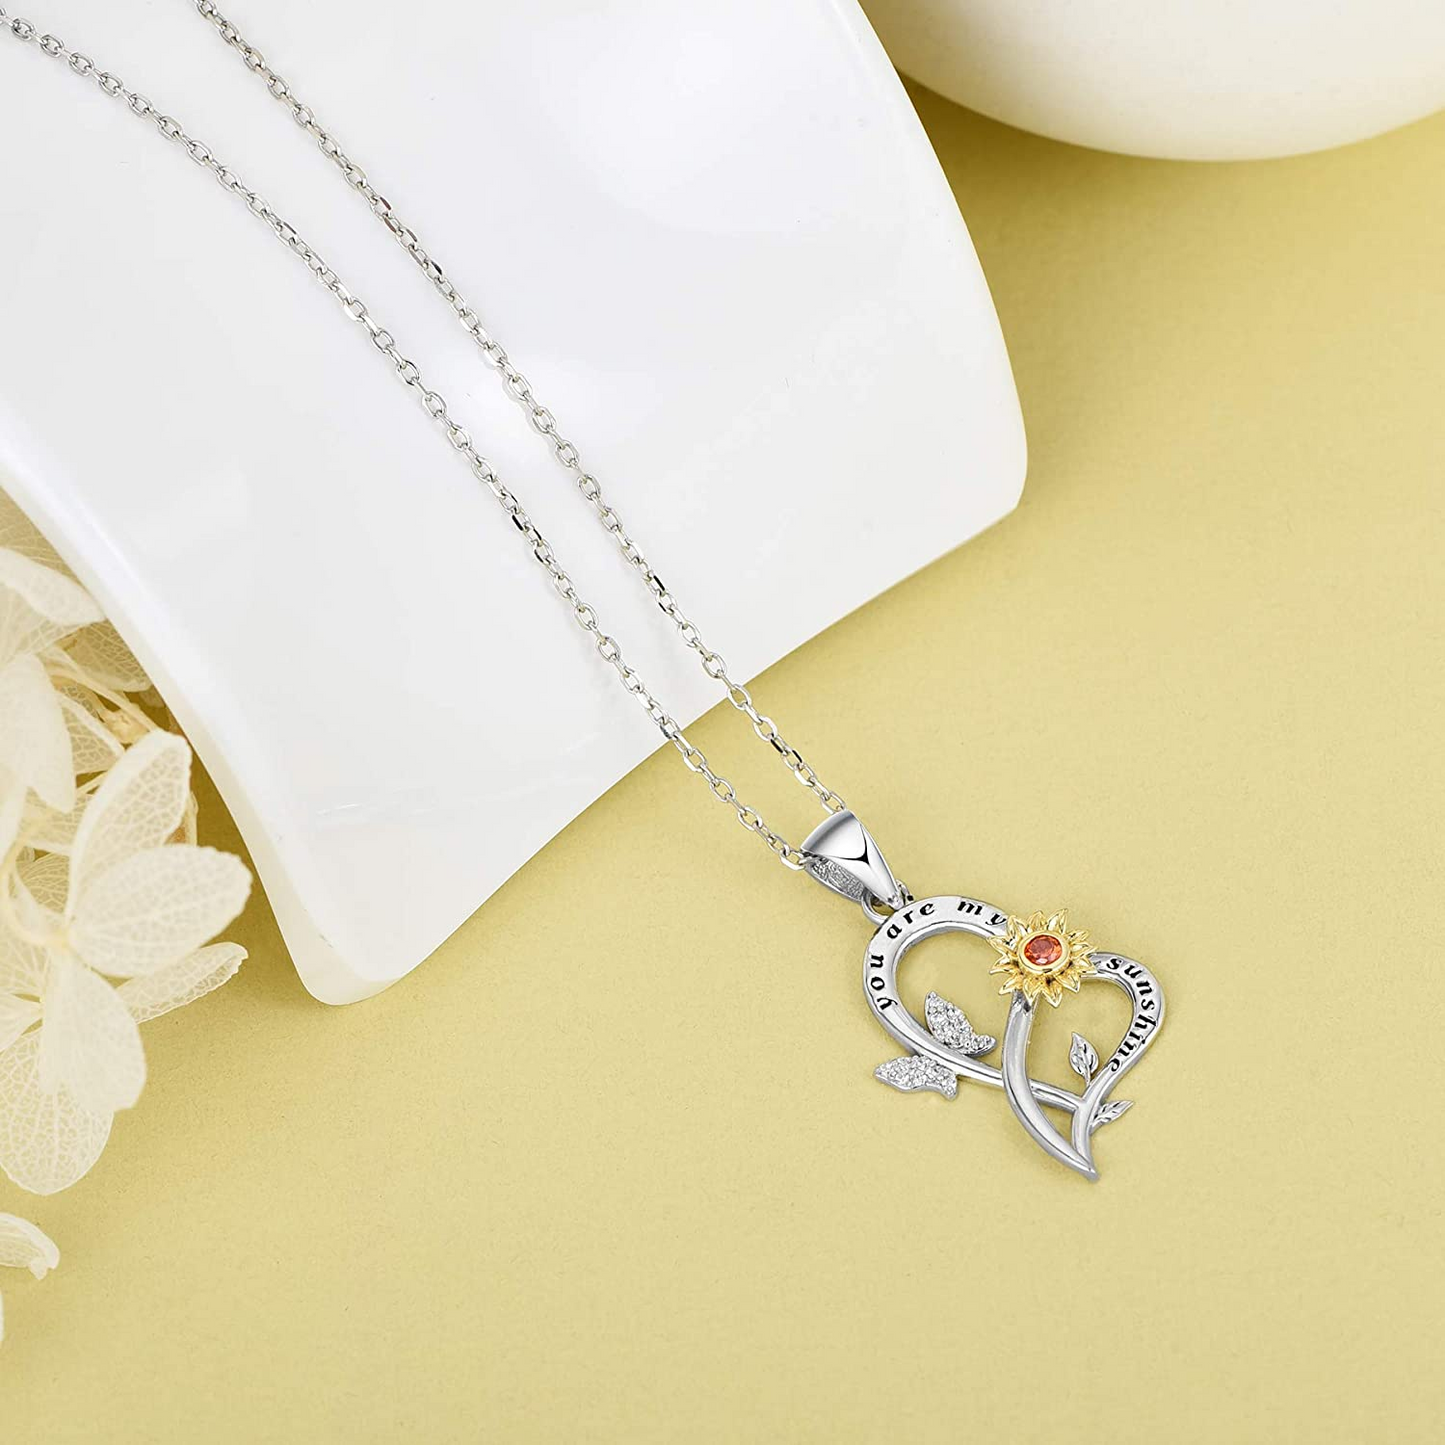 Distance Butterfly Sunflower Necklace for Women S925 Sterling Silver Heart Necklace Jewelry